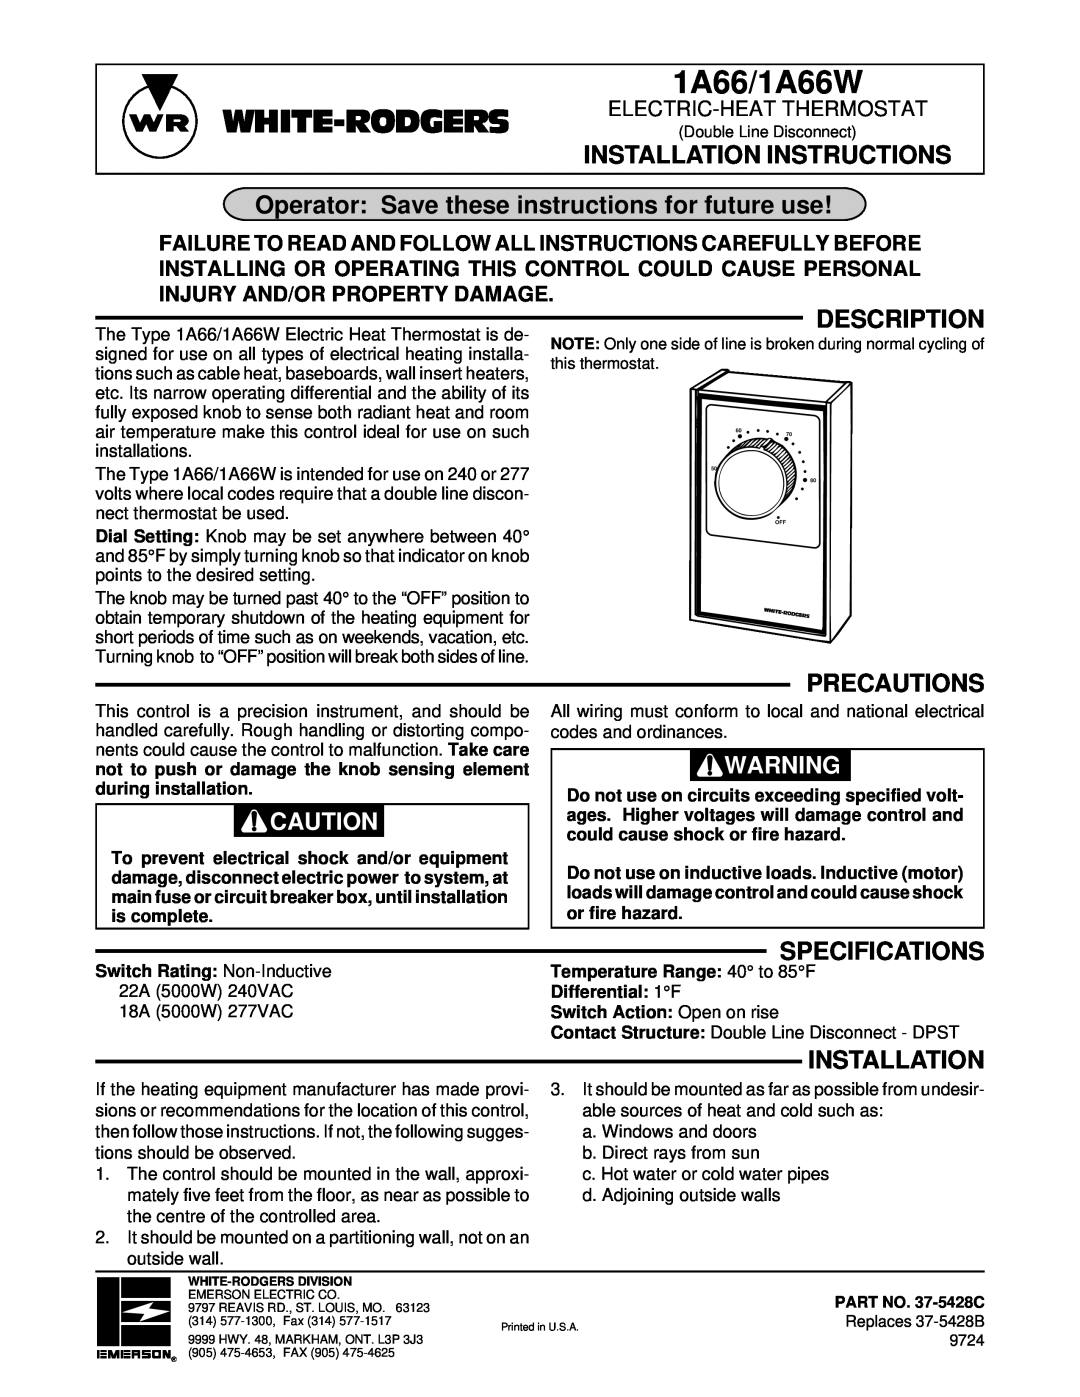 White Rodgers 1A66W installation instructions Installation Instructions, Operator Save these instructions for future use 